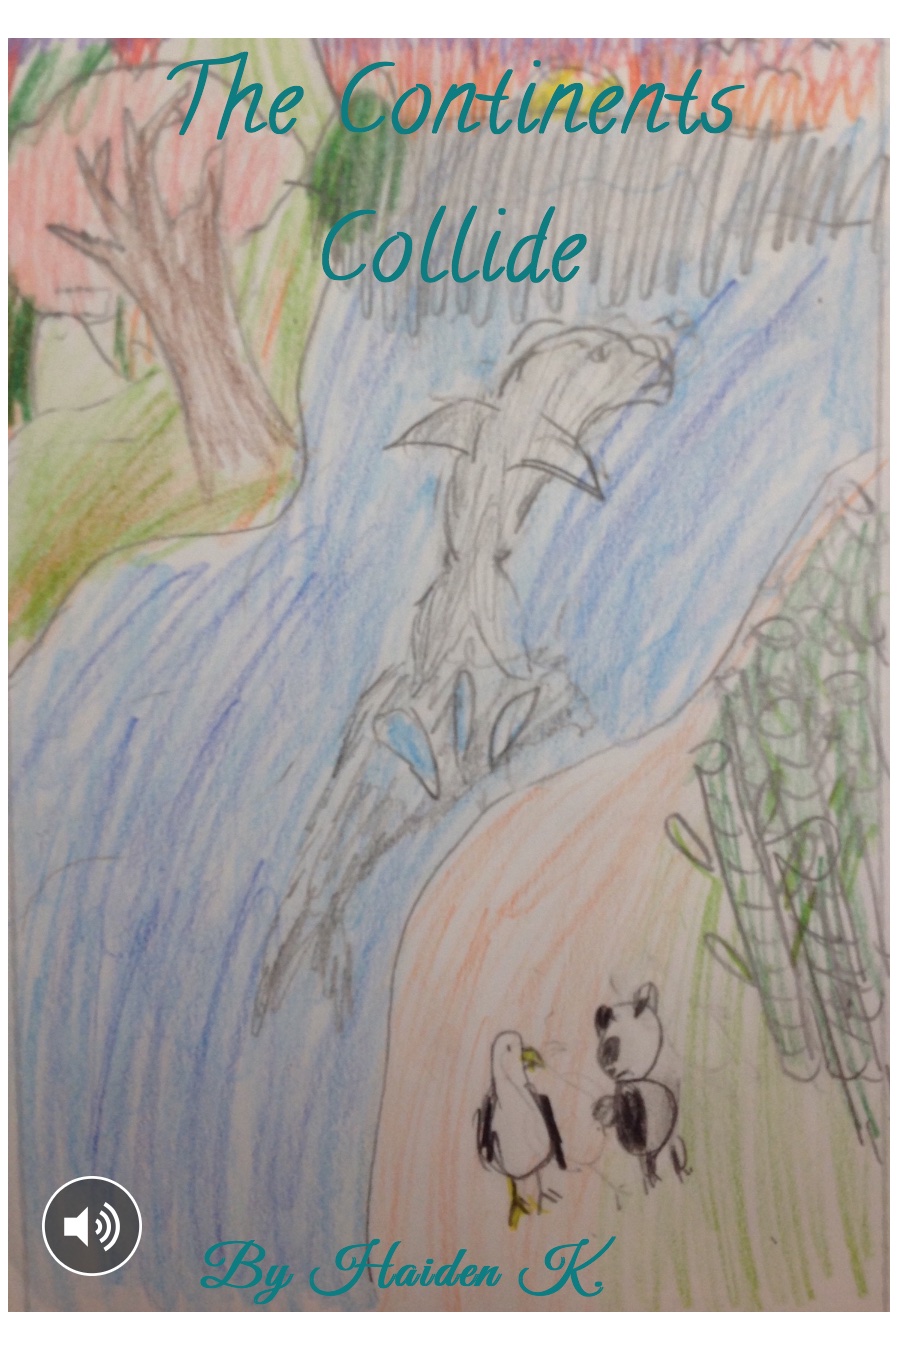 The Continents Collide by Haiden K